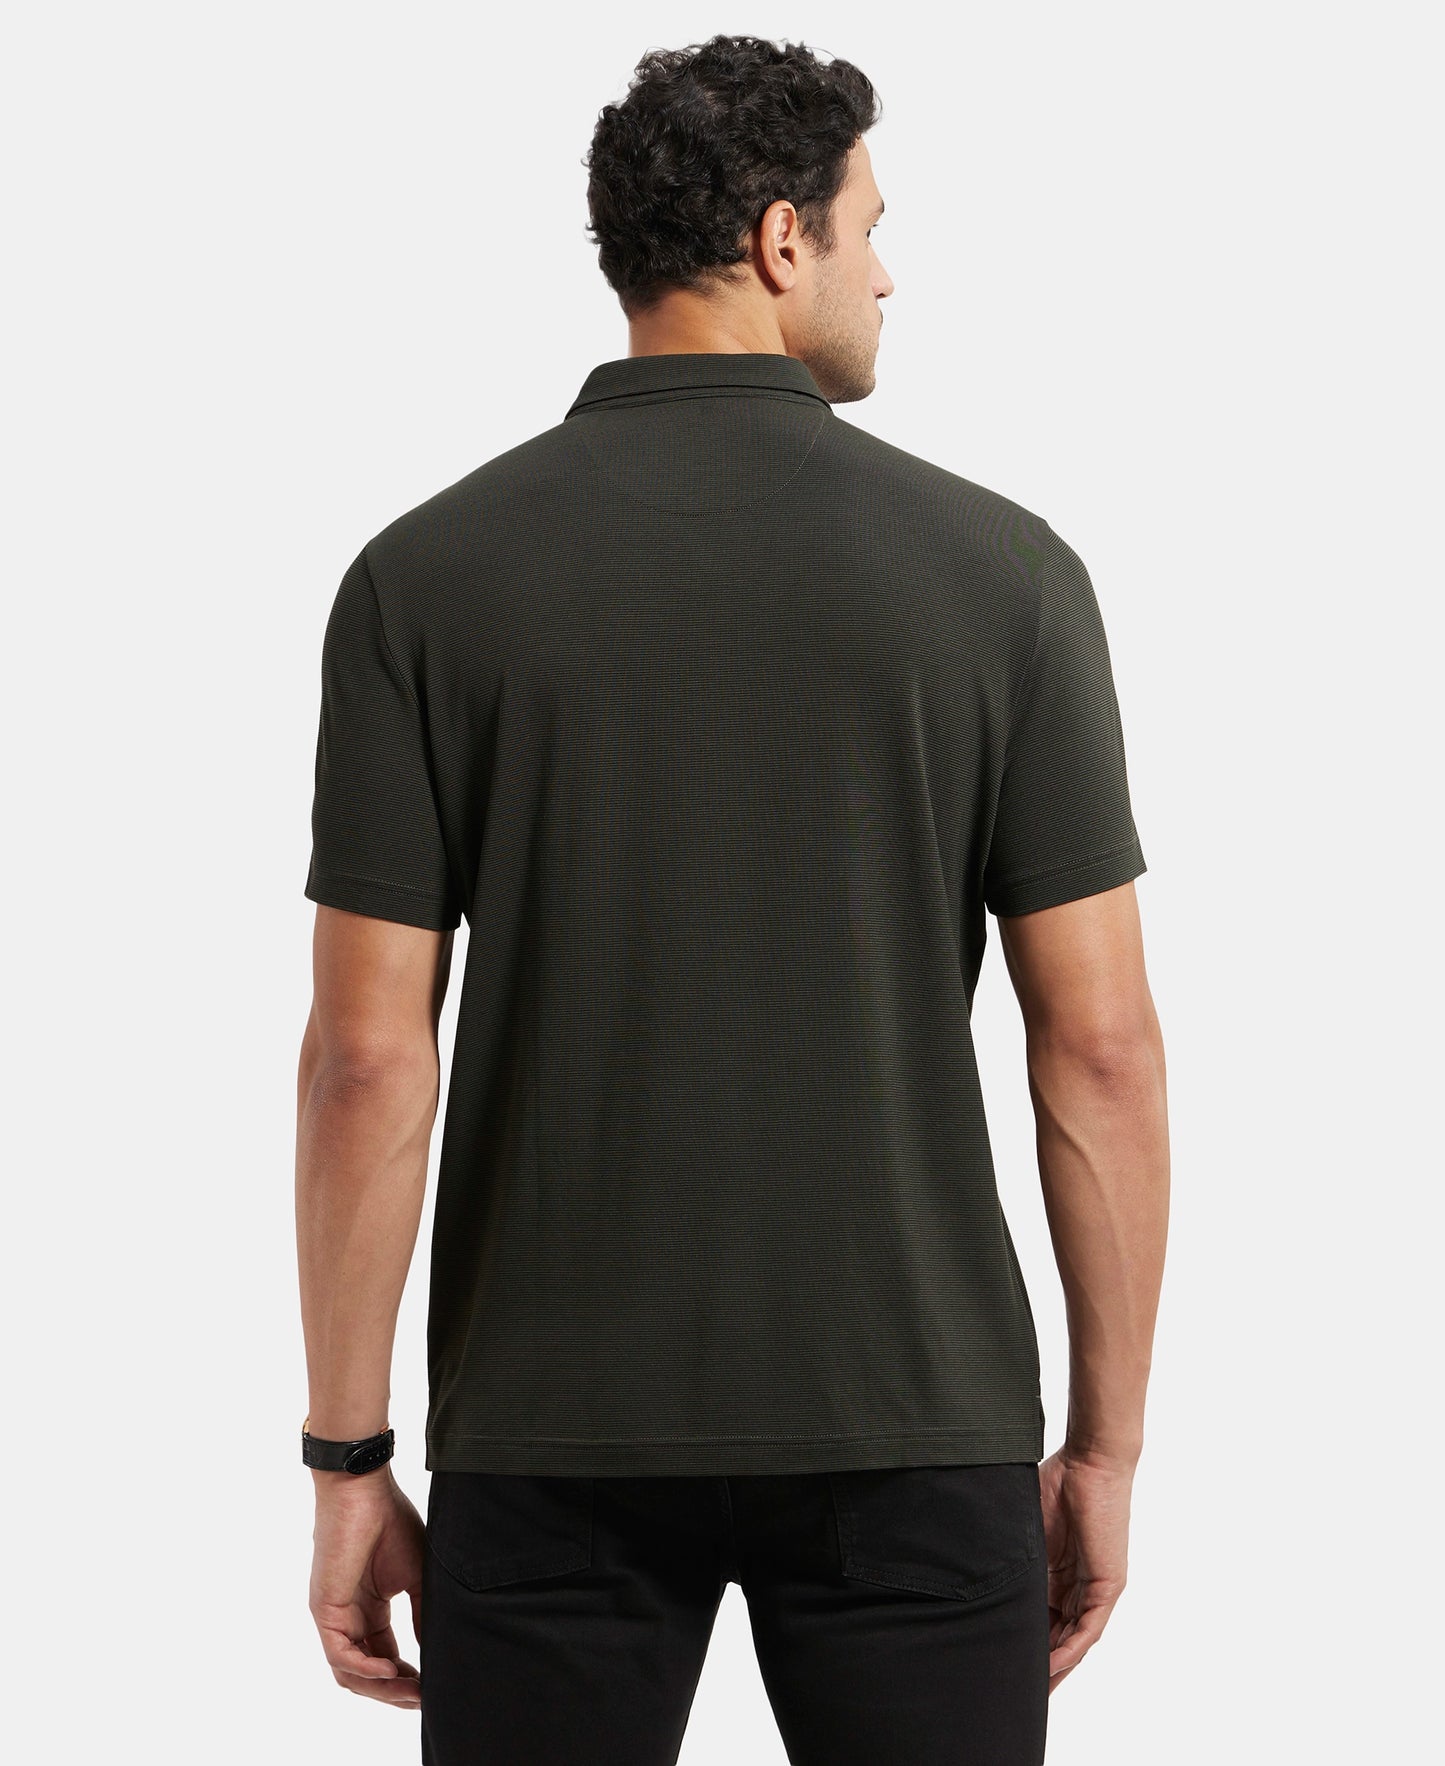 Tencel Micro Modal and Cotton Blend Thin Stripe Half Sleeve Polo T-Shirt - Forest Night